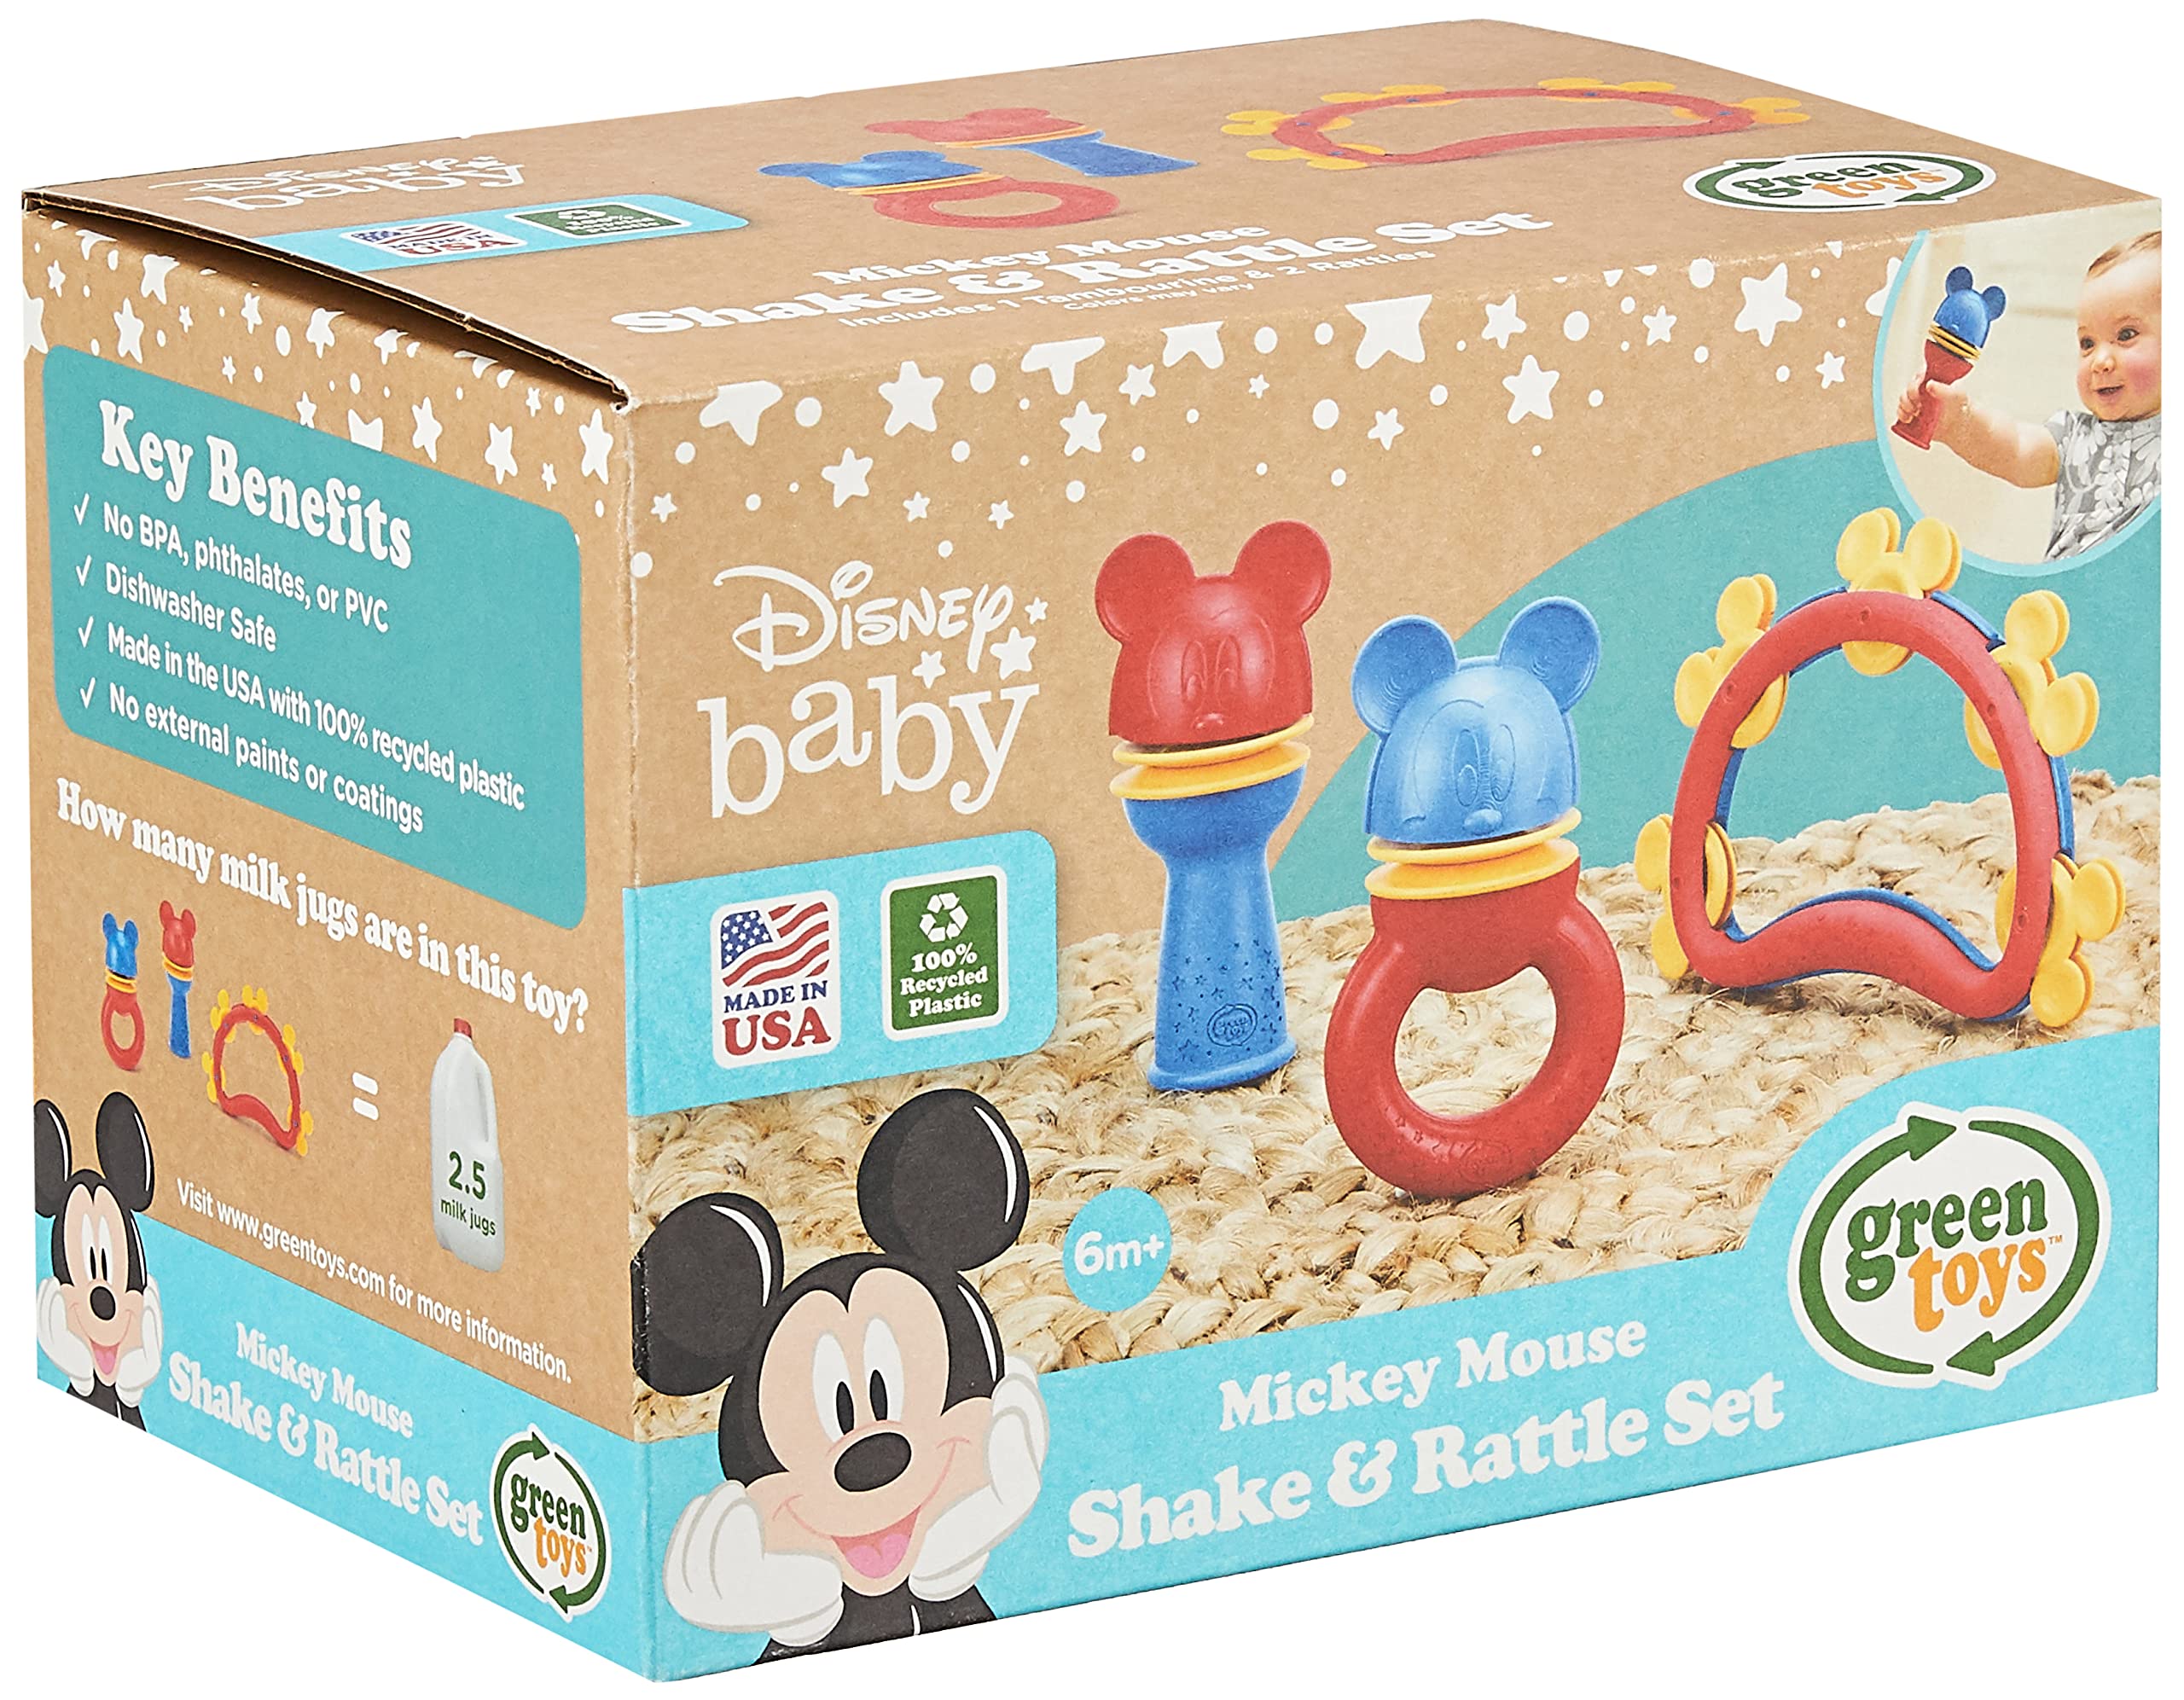 Green Toys Disney Baby Exclusive - Mickey Mouse Shake & Rattle Set, DSRTS-1435